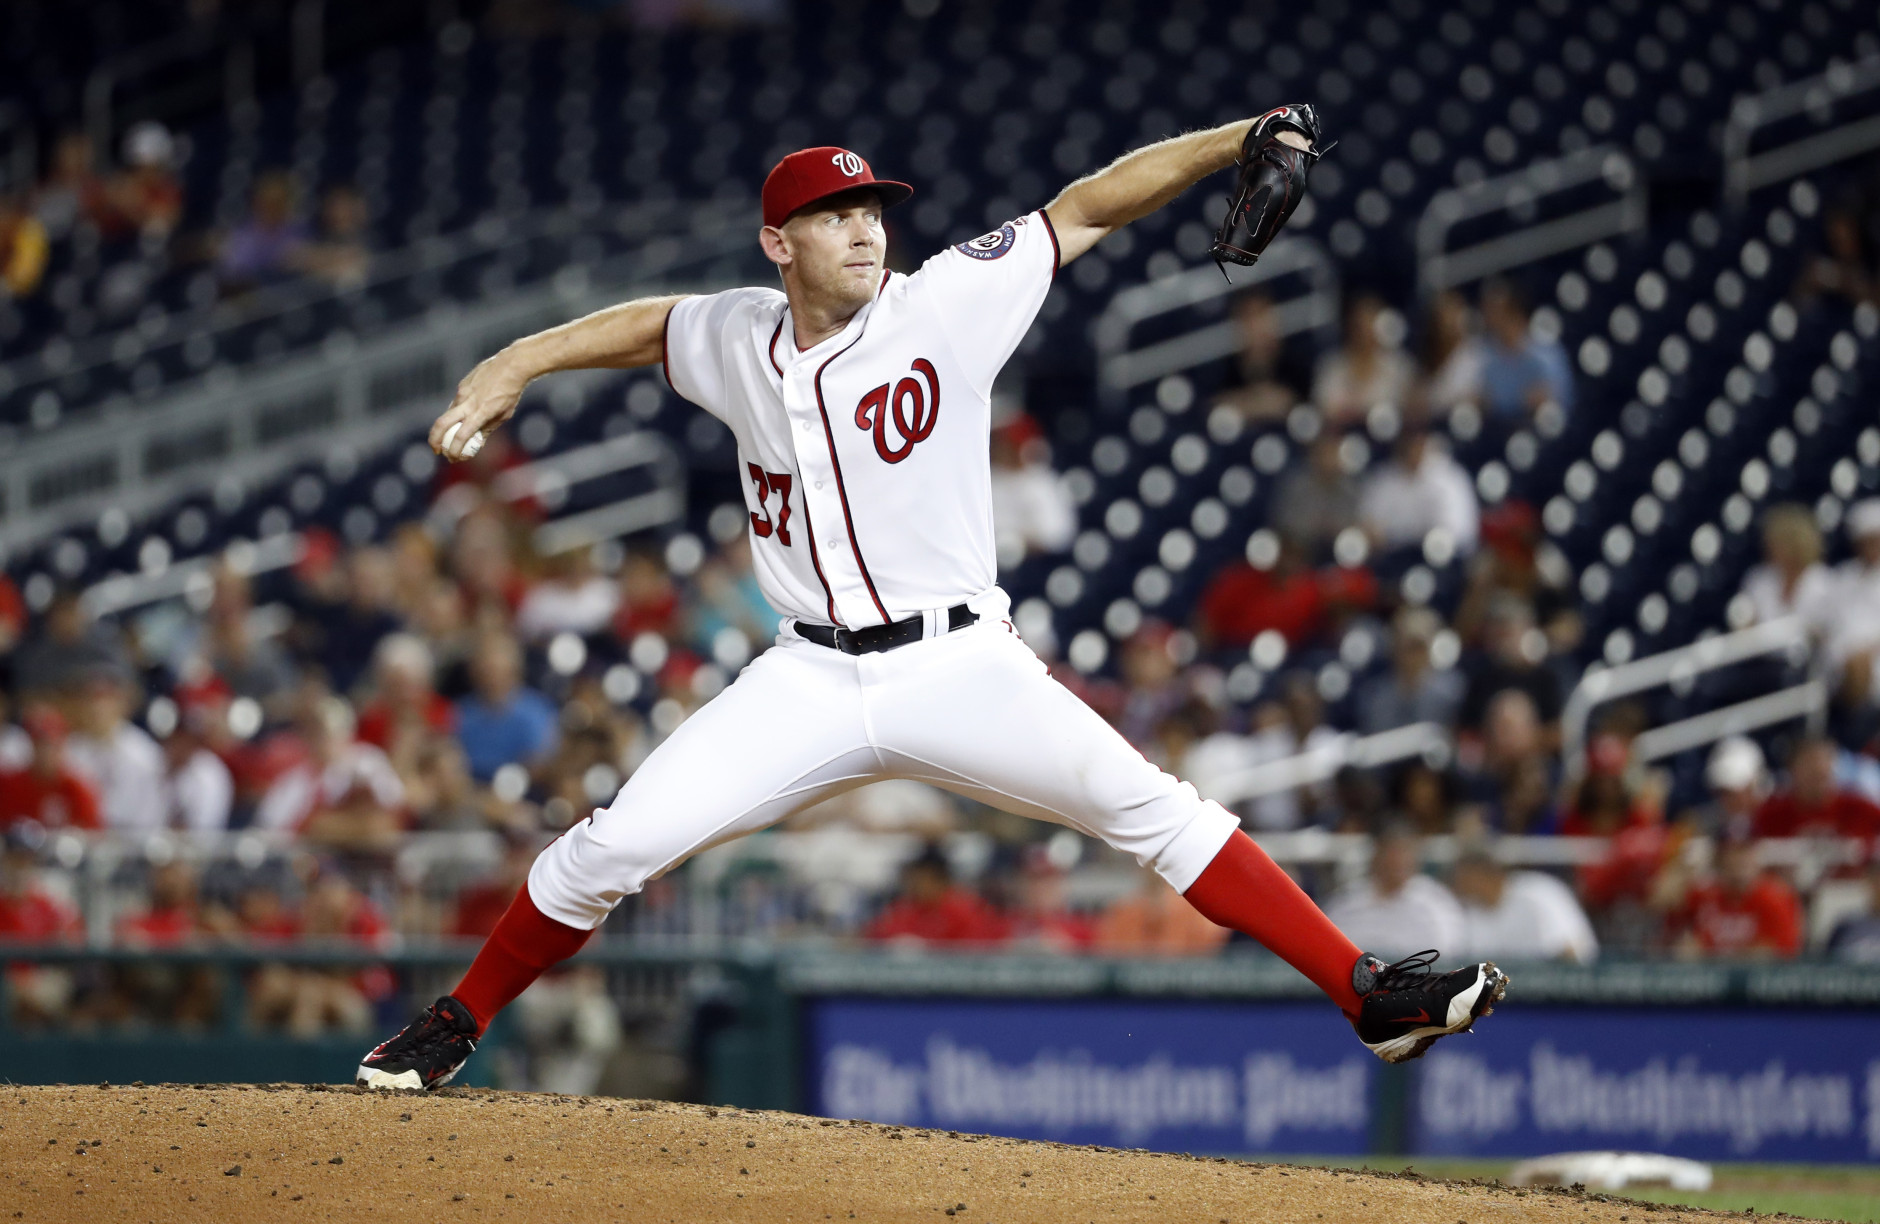 Stephen Strasburg Surgery: 10 Other Flame-Outs by Pitching Greats